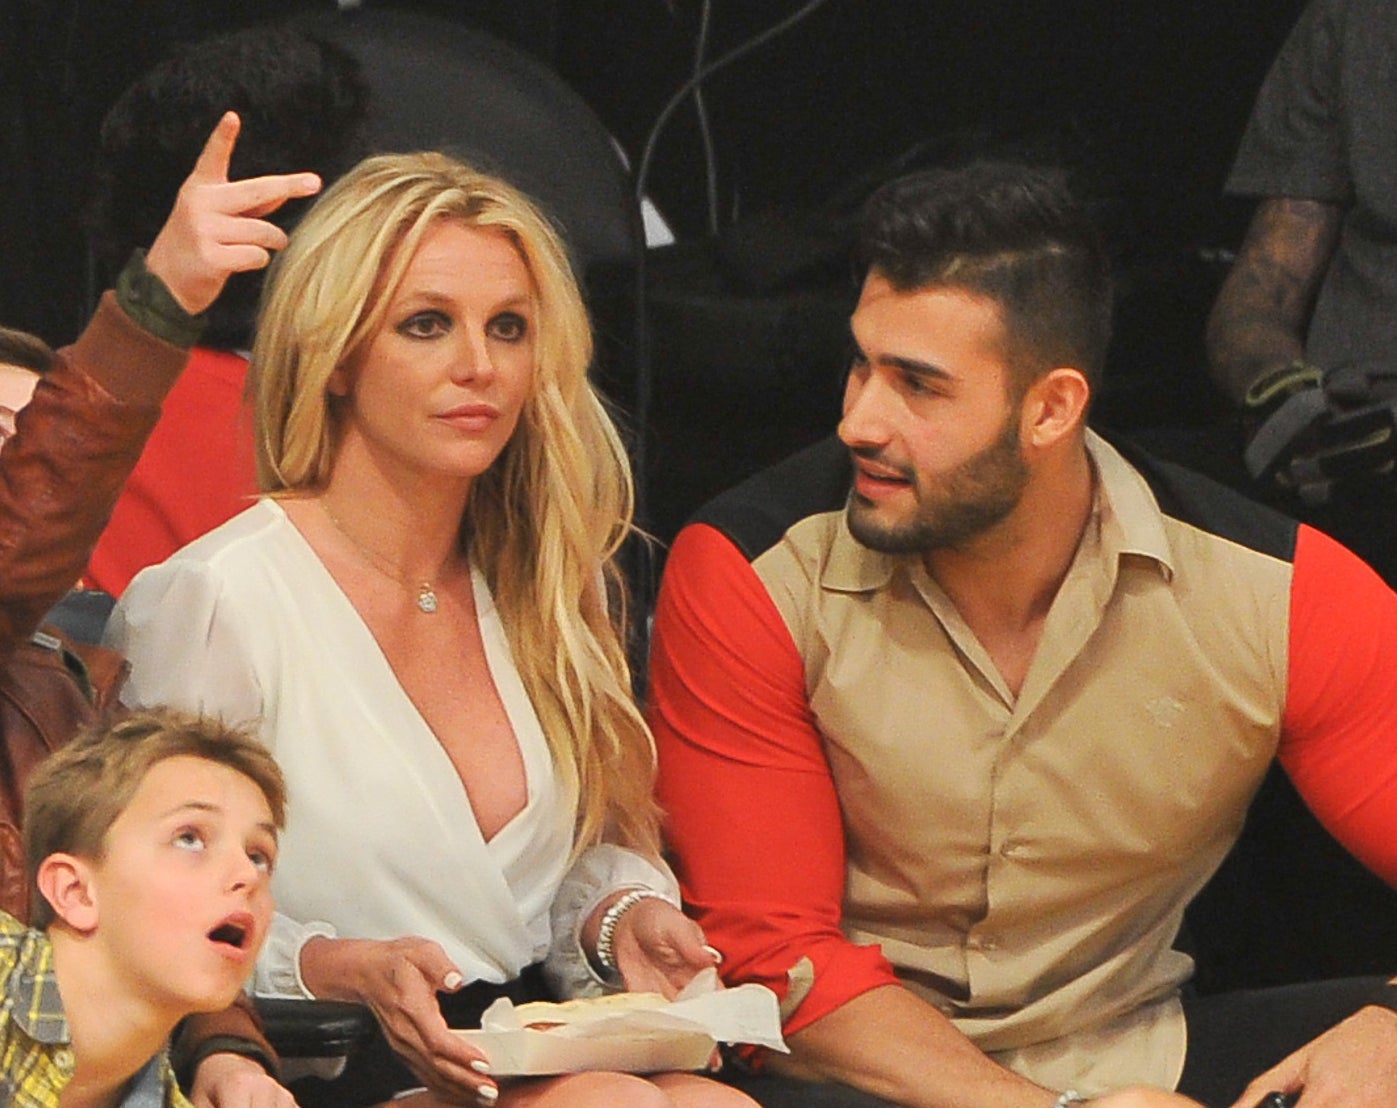 Close-up of Britney and Sam sitting together in an audience